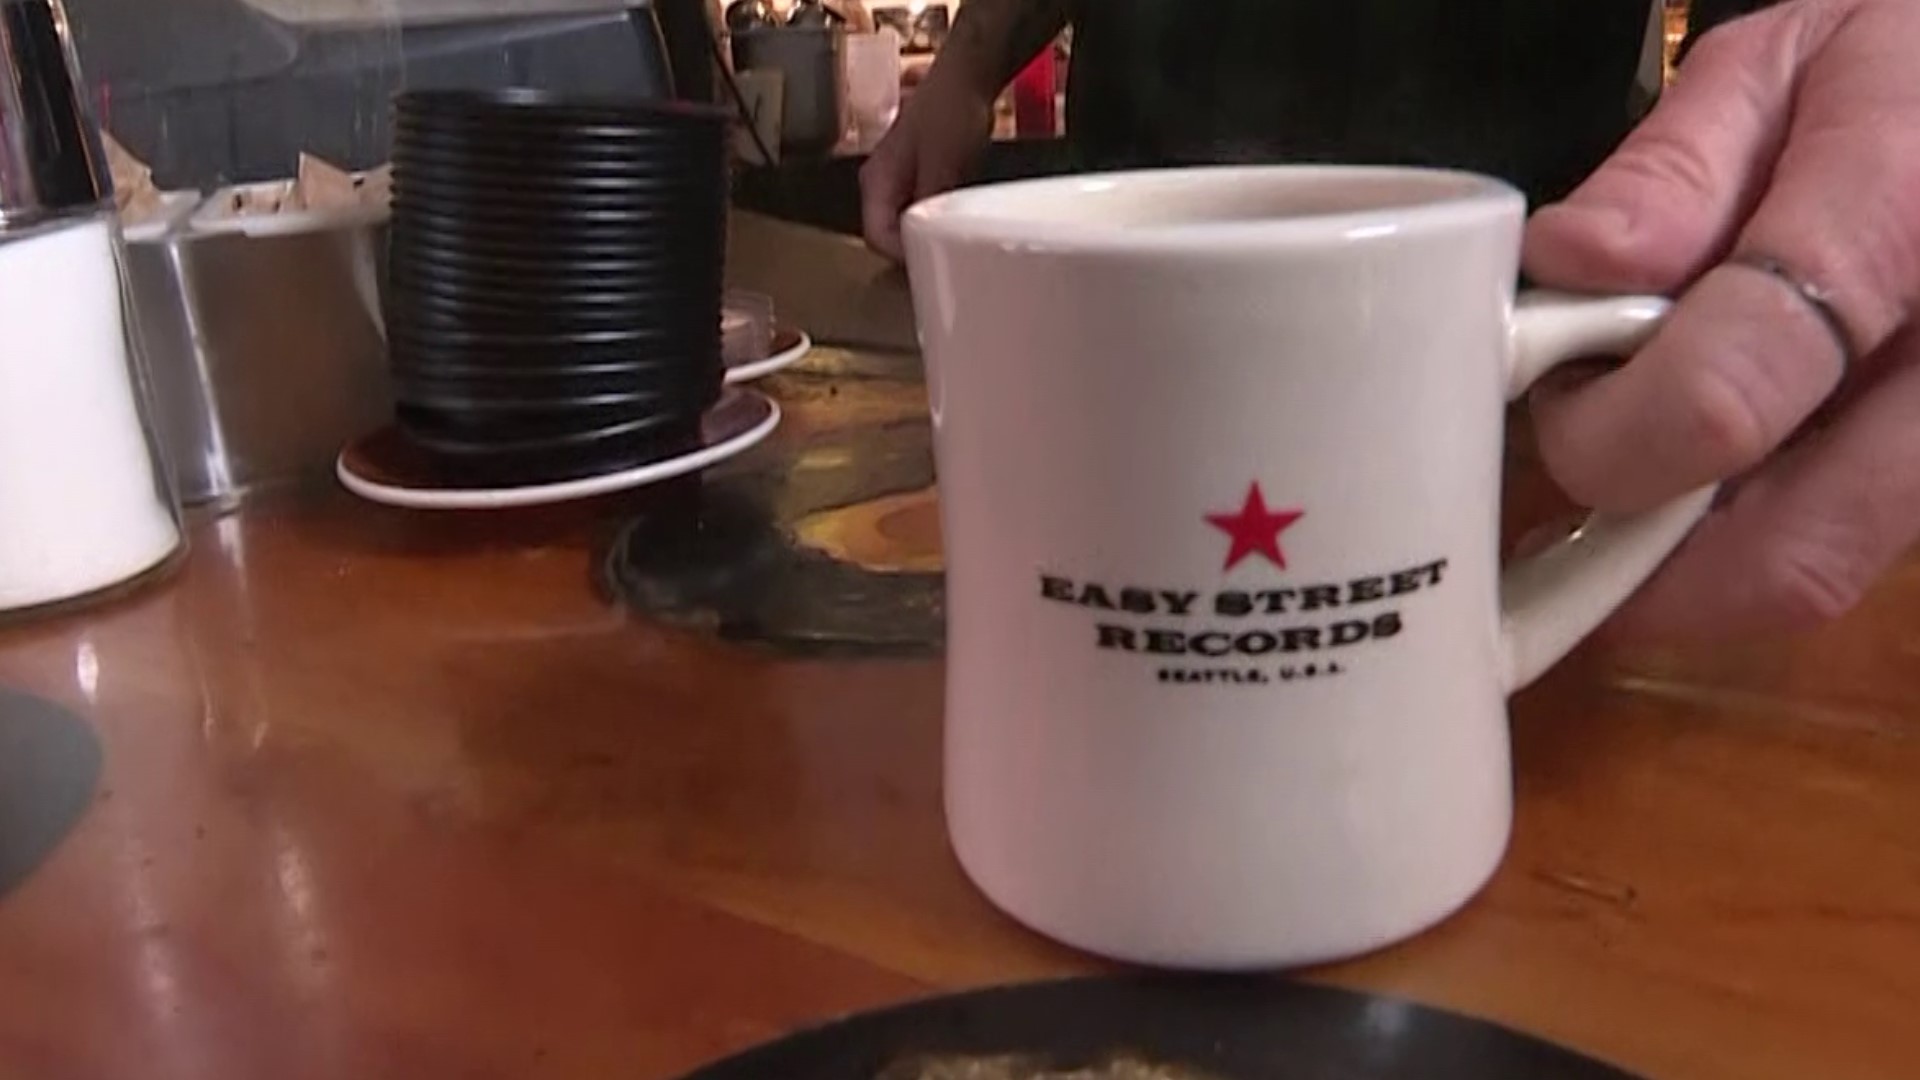 Easy Street Records and Cafe goes beyond the traditional to create memorable experiences for visitors. #k5evening